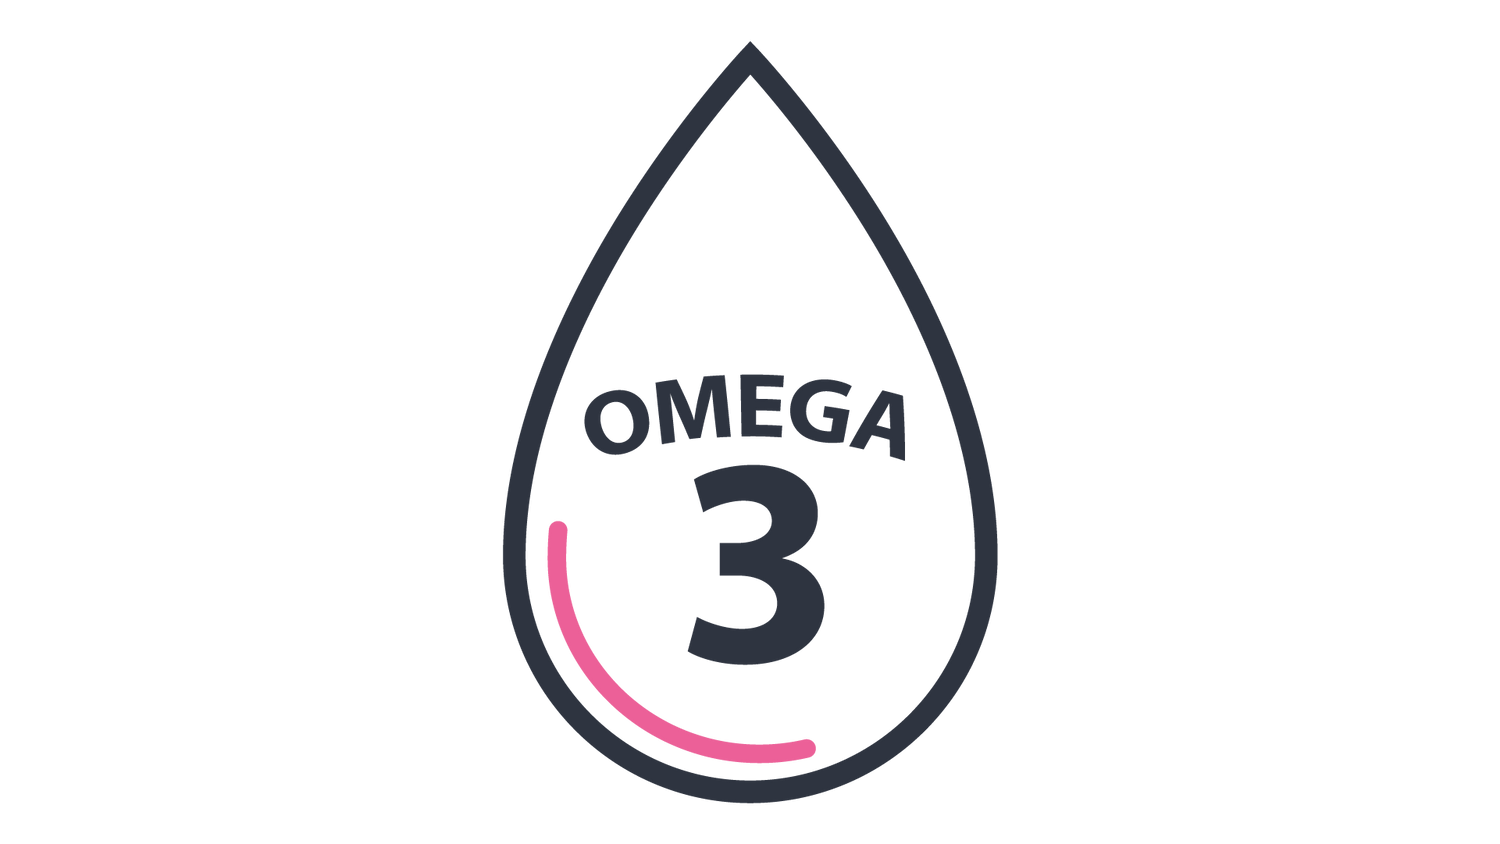 Icon of a water droplet with the text “OMEGA 3